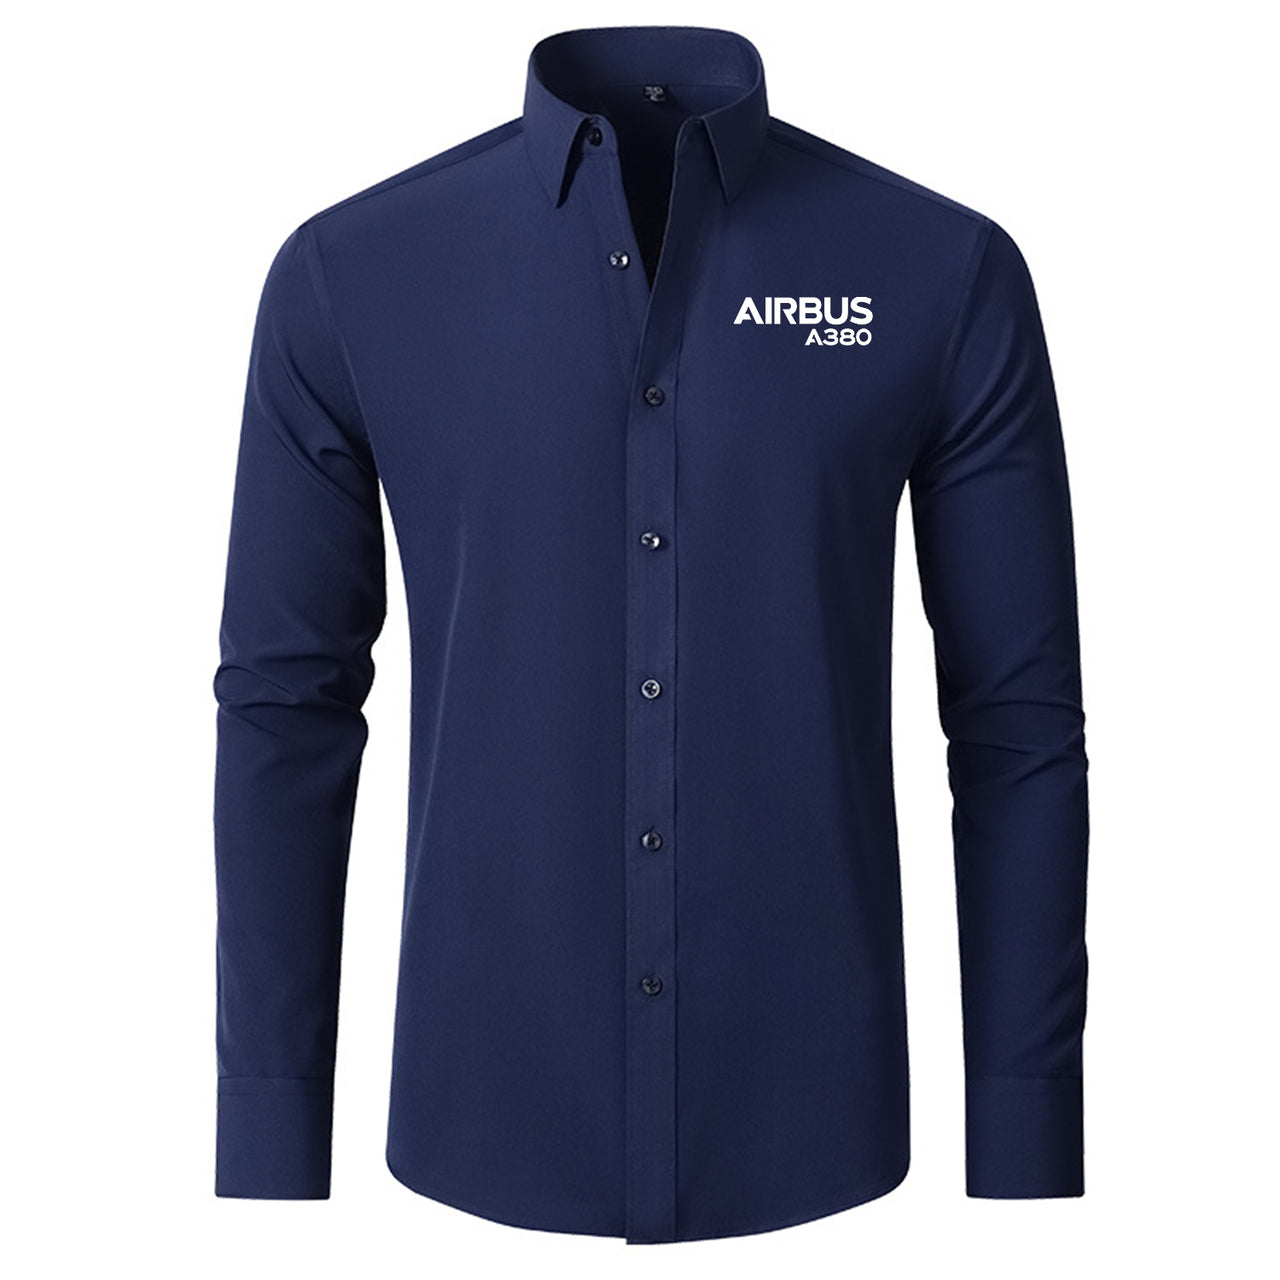 Airbus A380 & Text Designed Long Sleeve Shirts